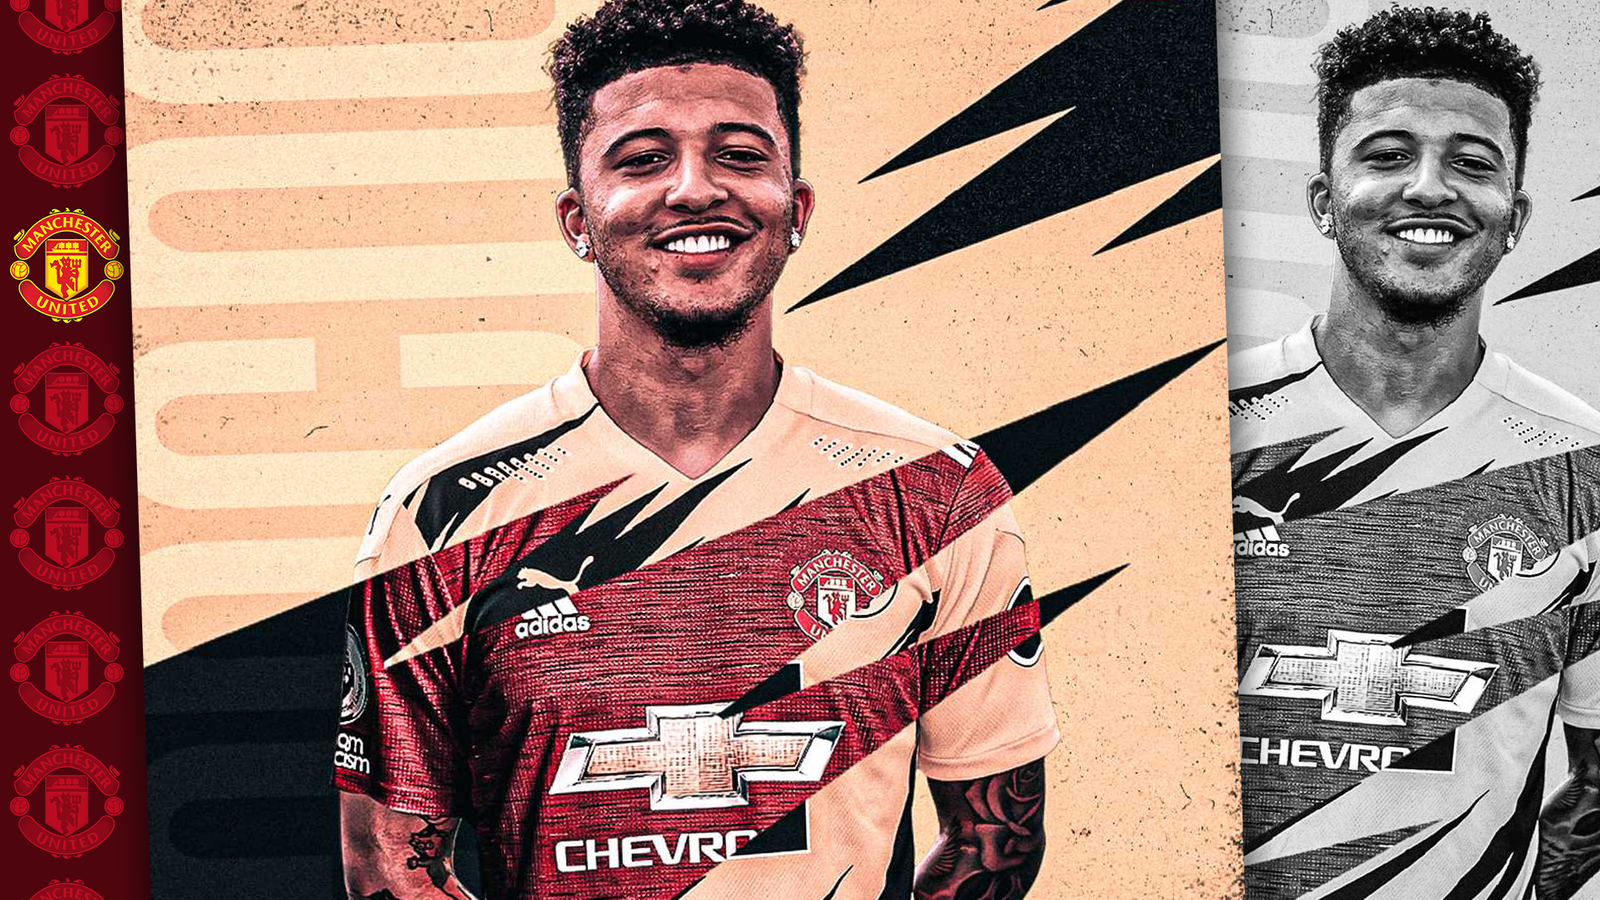 Manchester United agree £73m deal to sign England winger Jadon Sancho from Borussia Dortmund